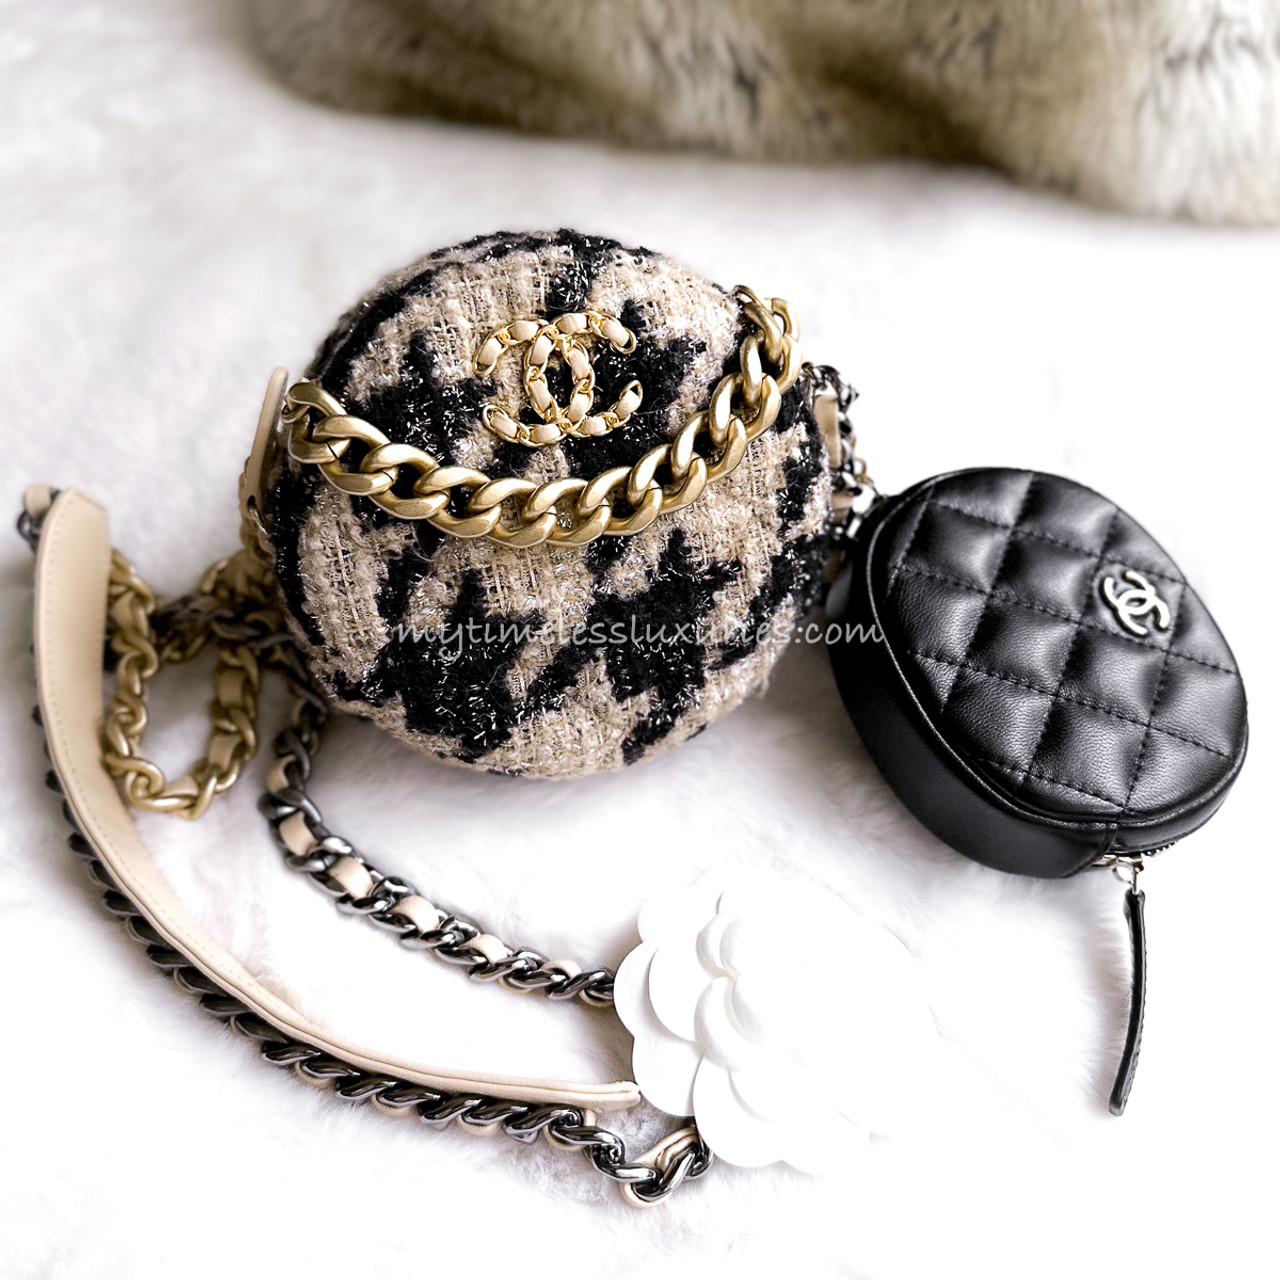 ORDER CHANEL 19 Flap Coin Purse with Chain